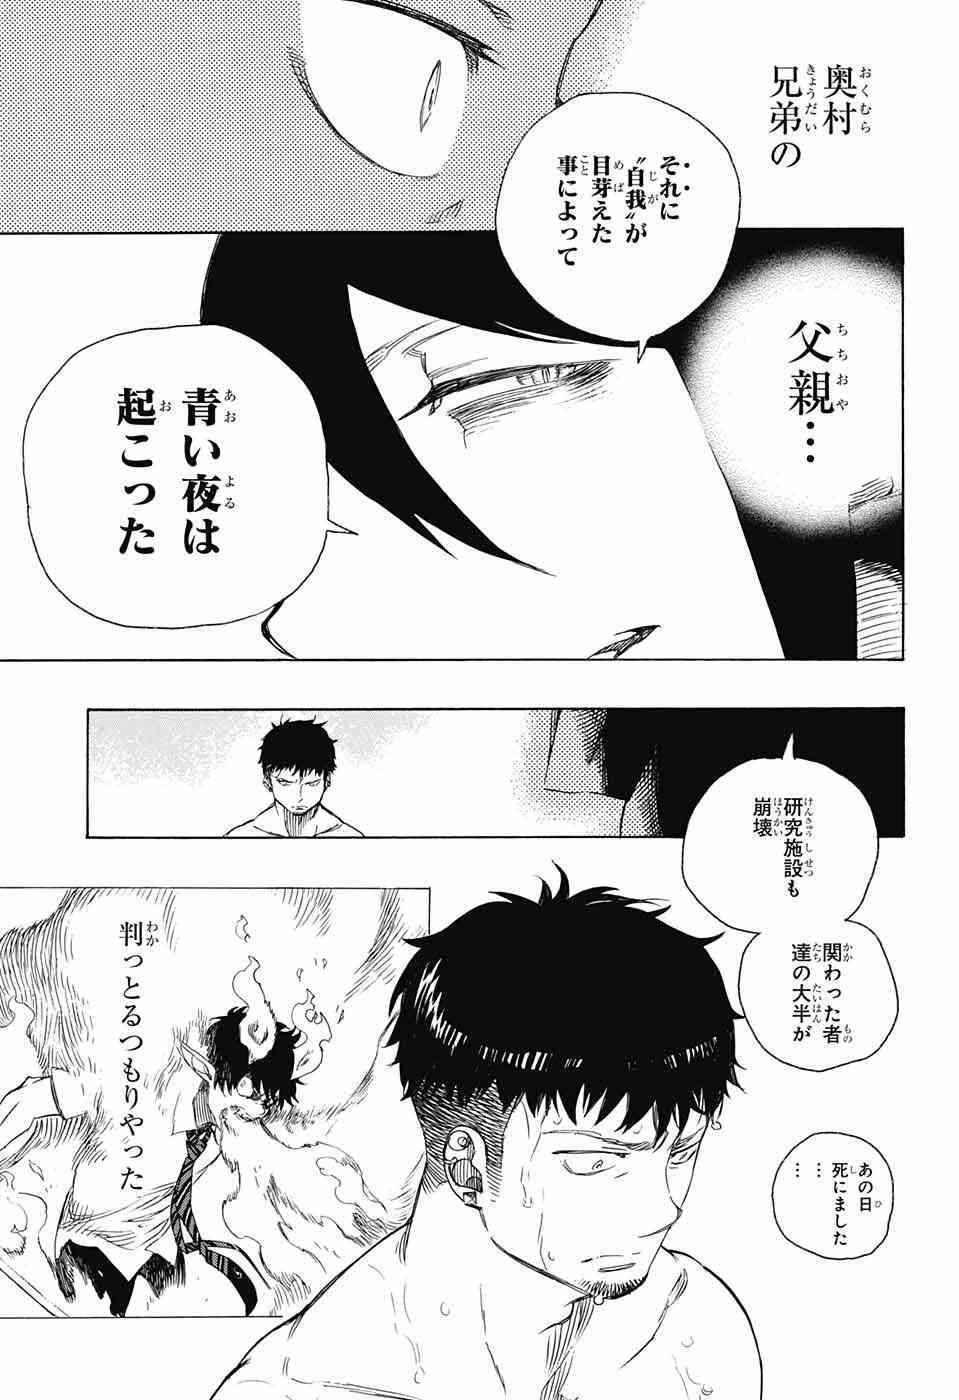 Ao no Exorcist - Chapter 86 - Page 36